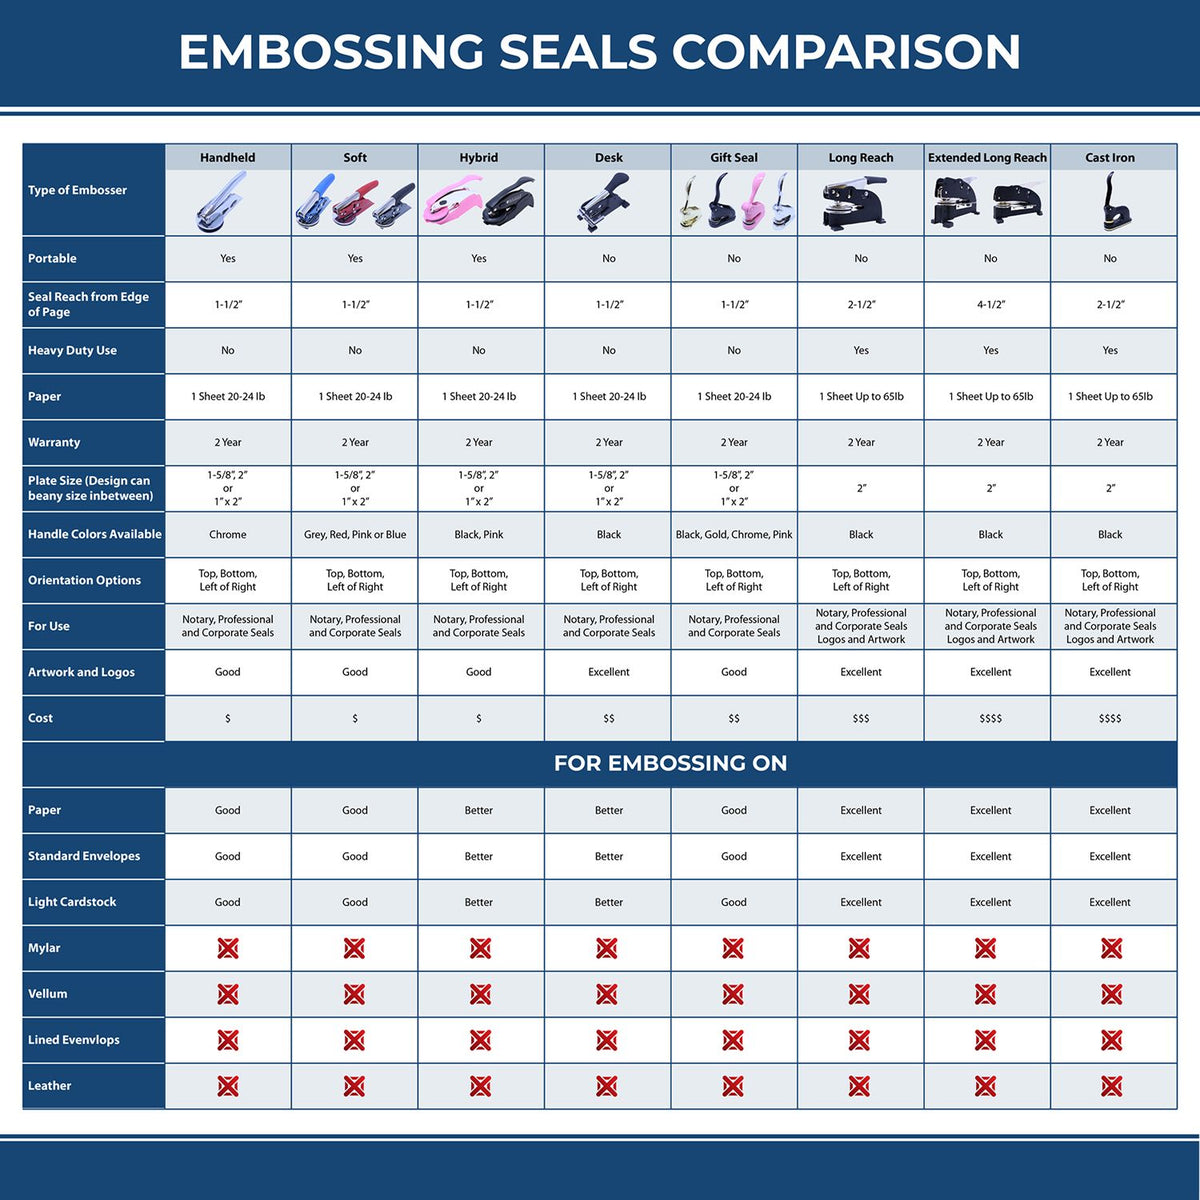 A comparison chart for the different types of mount models available for the Handheld Montana Land Surveyor Seal.